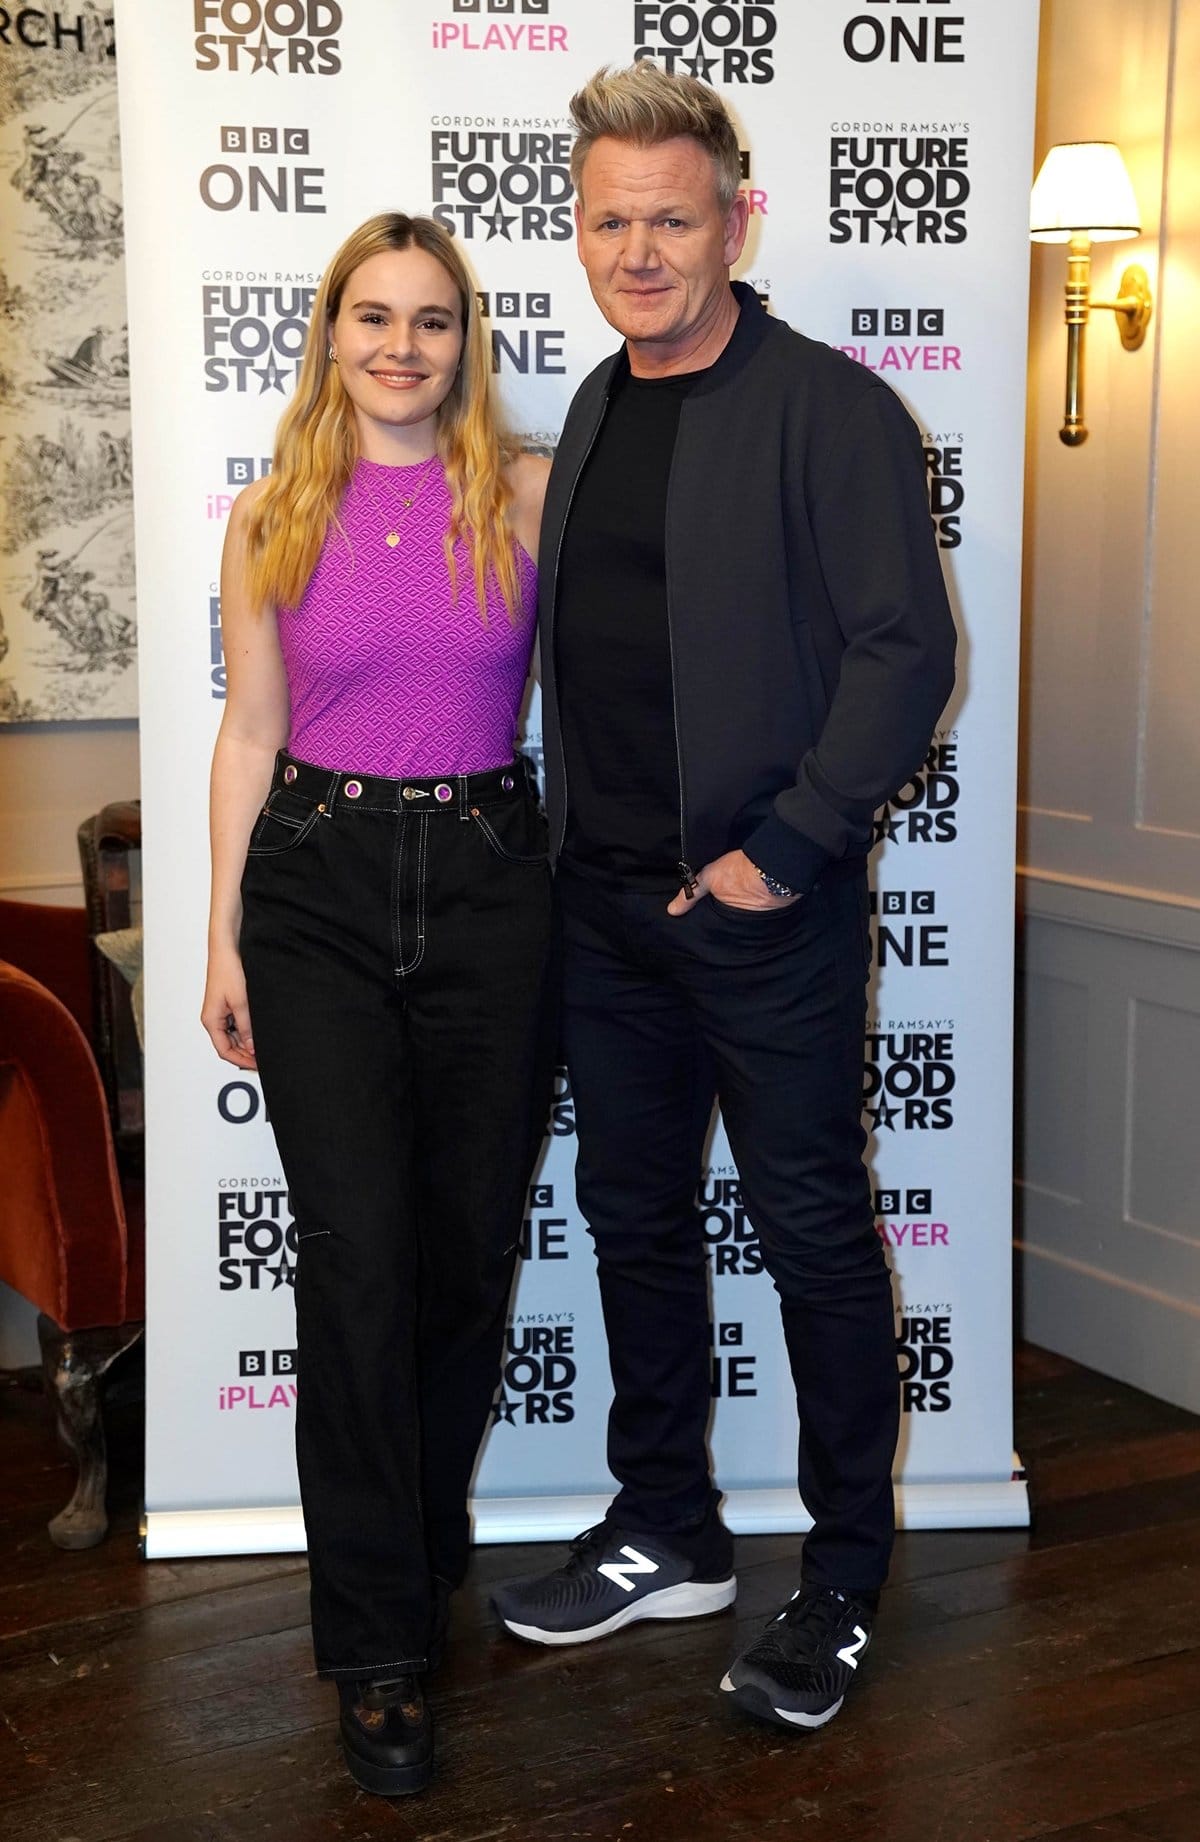 Holly Ramsay in a purple Fendi bodysuit and Topshop mom jeans with her father Gordon Ramsay at the launch of his new TV show Gordon's Future Food Stars